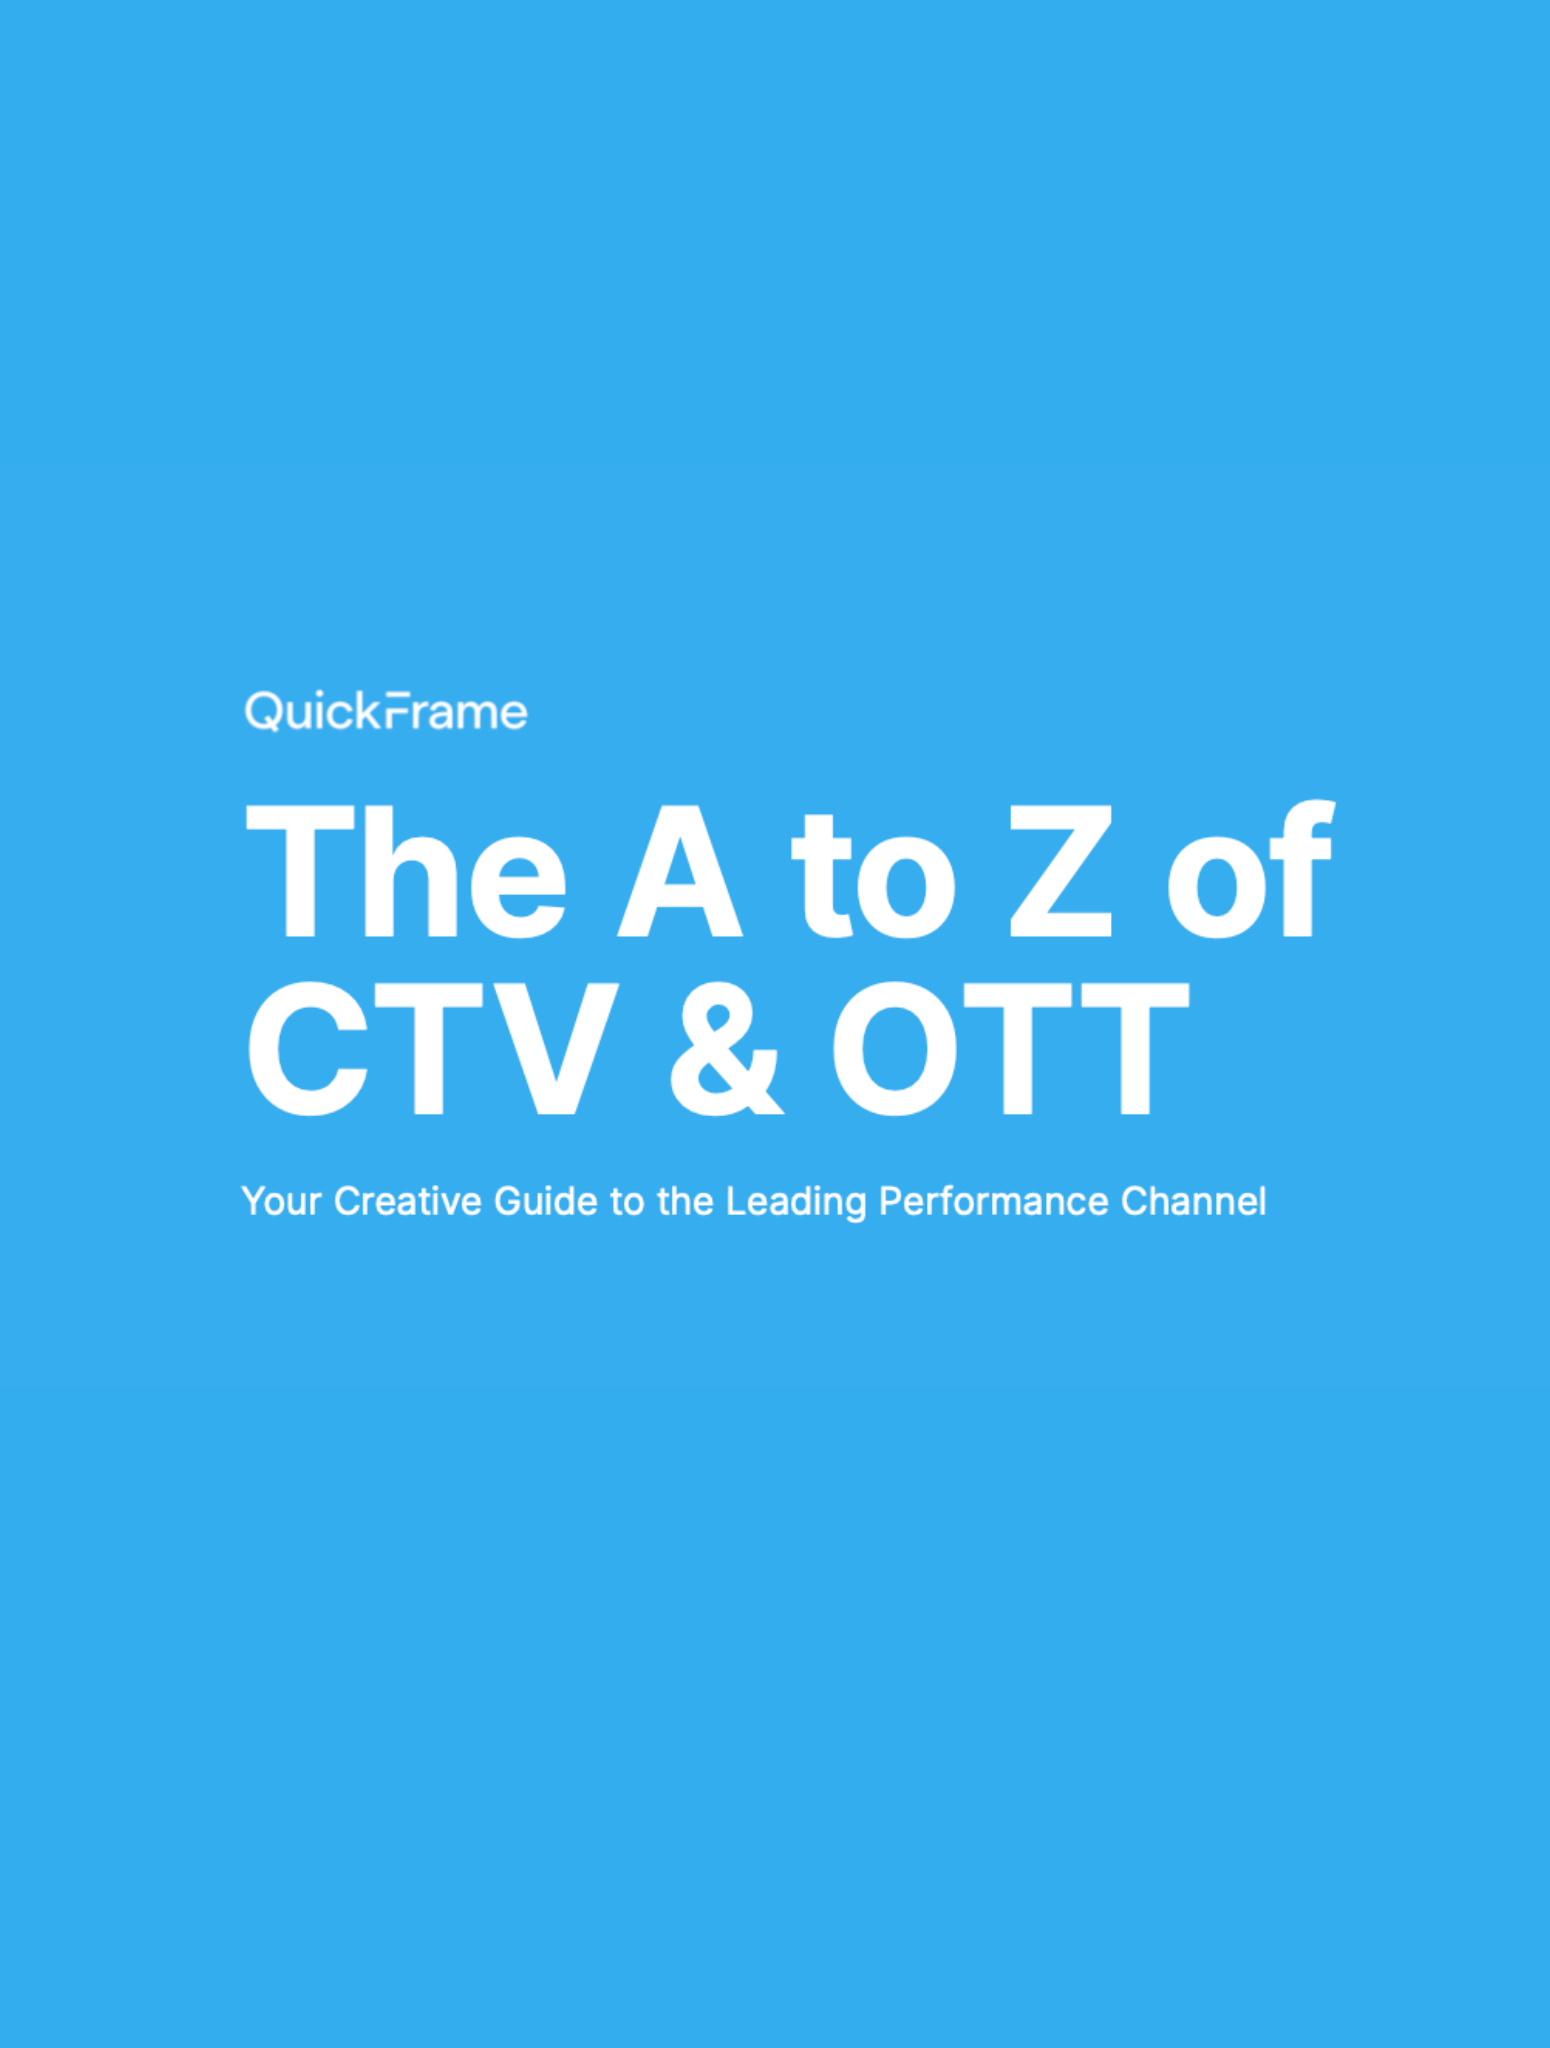 The A to Z of CTV & OTT